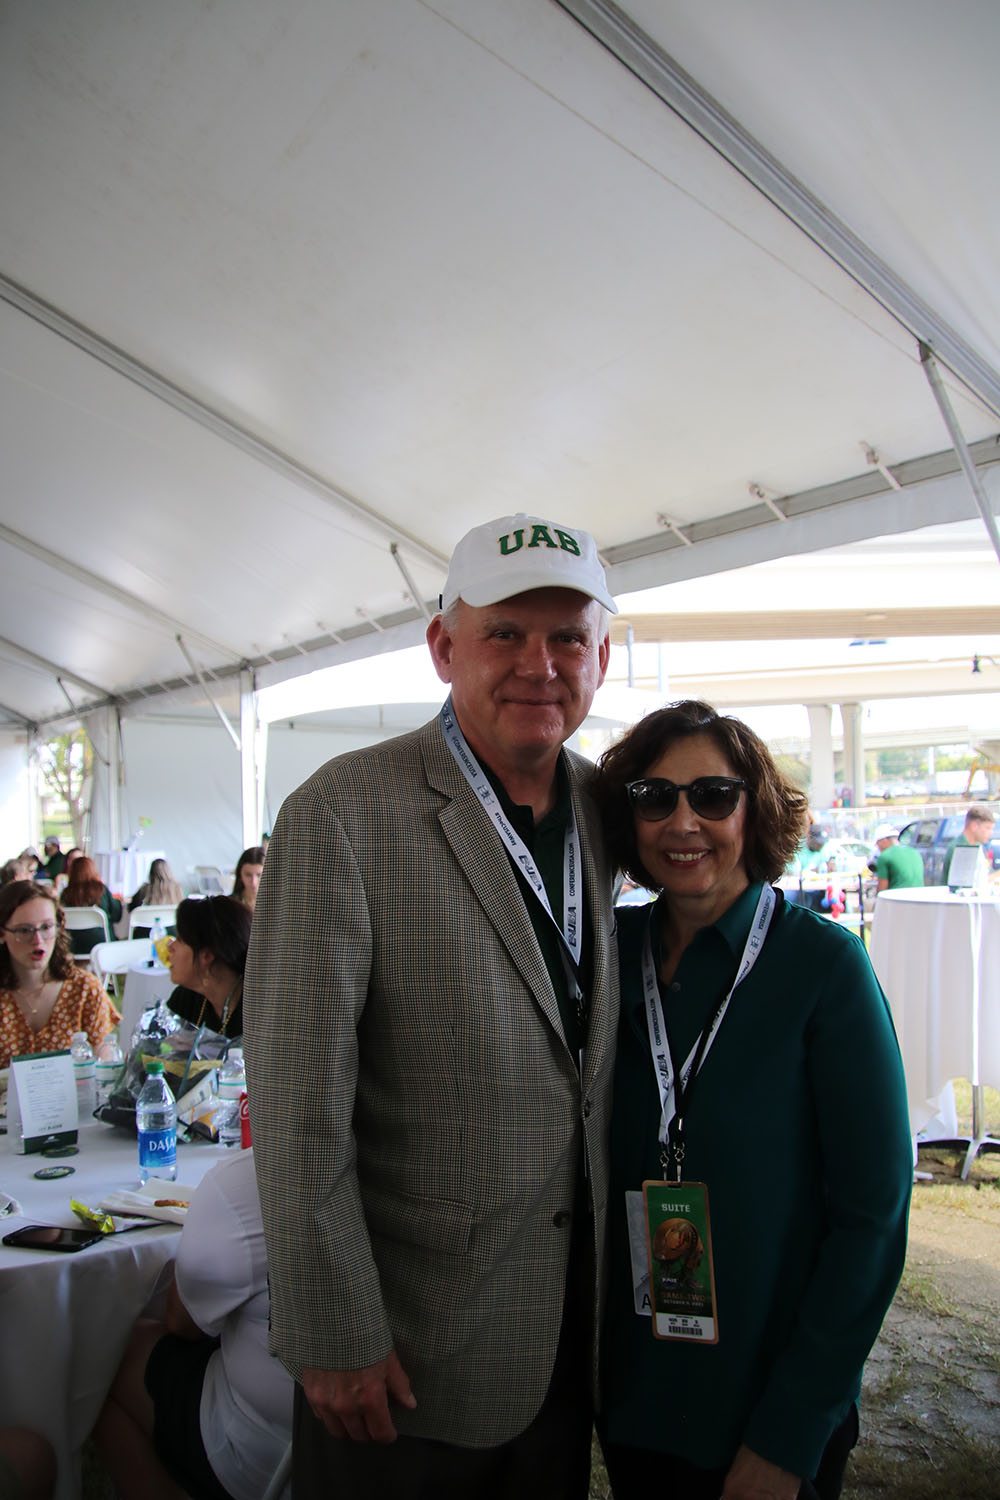 UAB President Watts with his wife